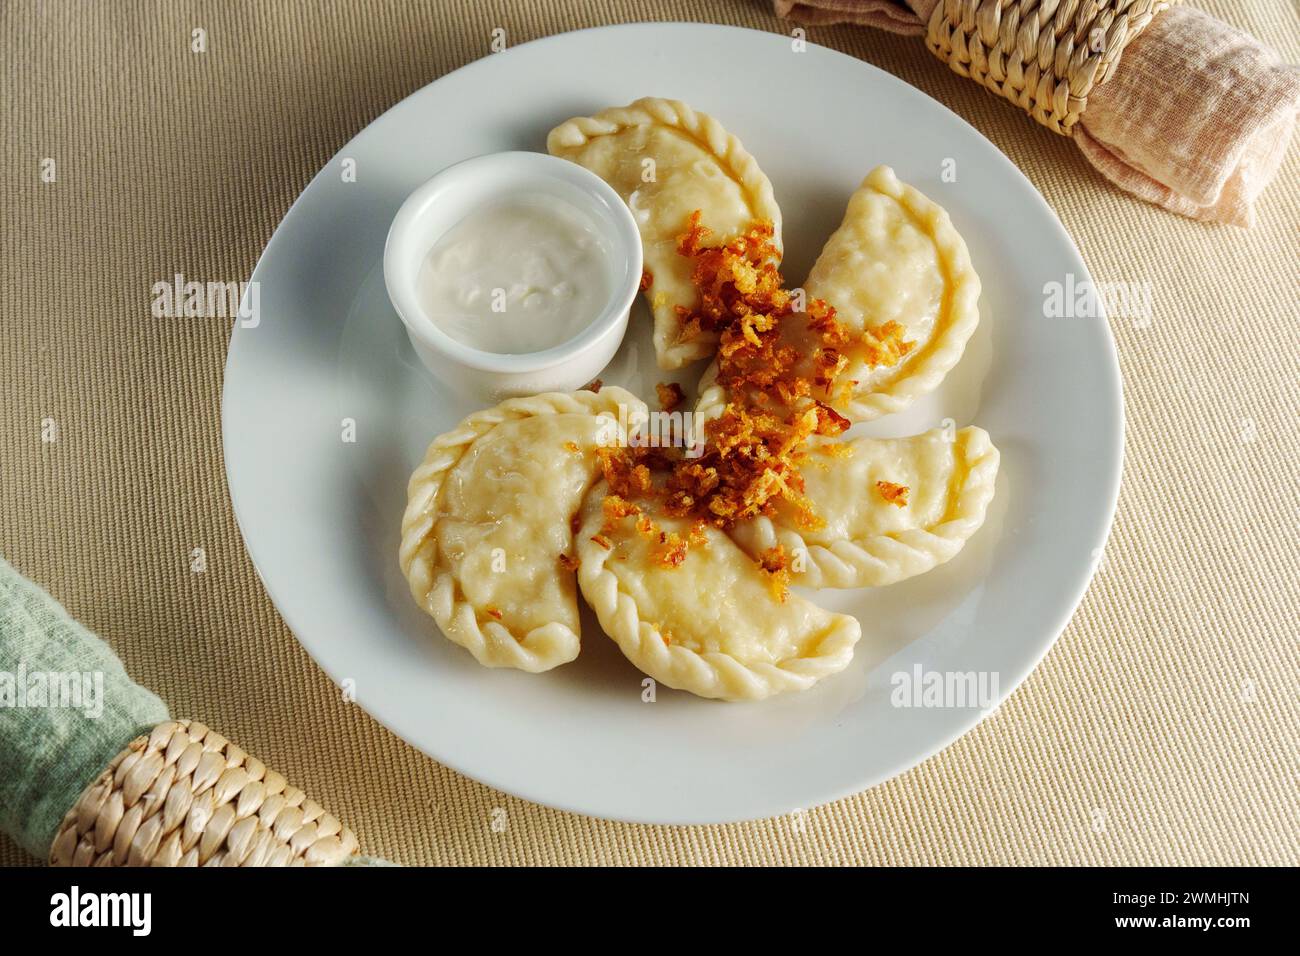 Delicate Pleasures: A Luxurious Feast of Dumplings and Exquisite Dip Stock Photo